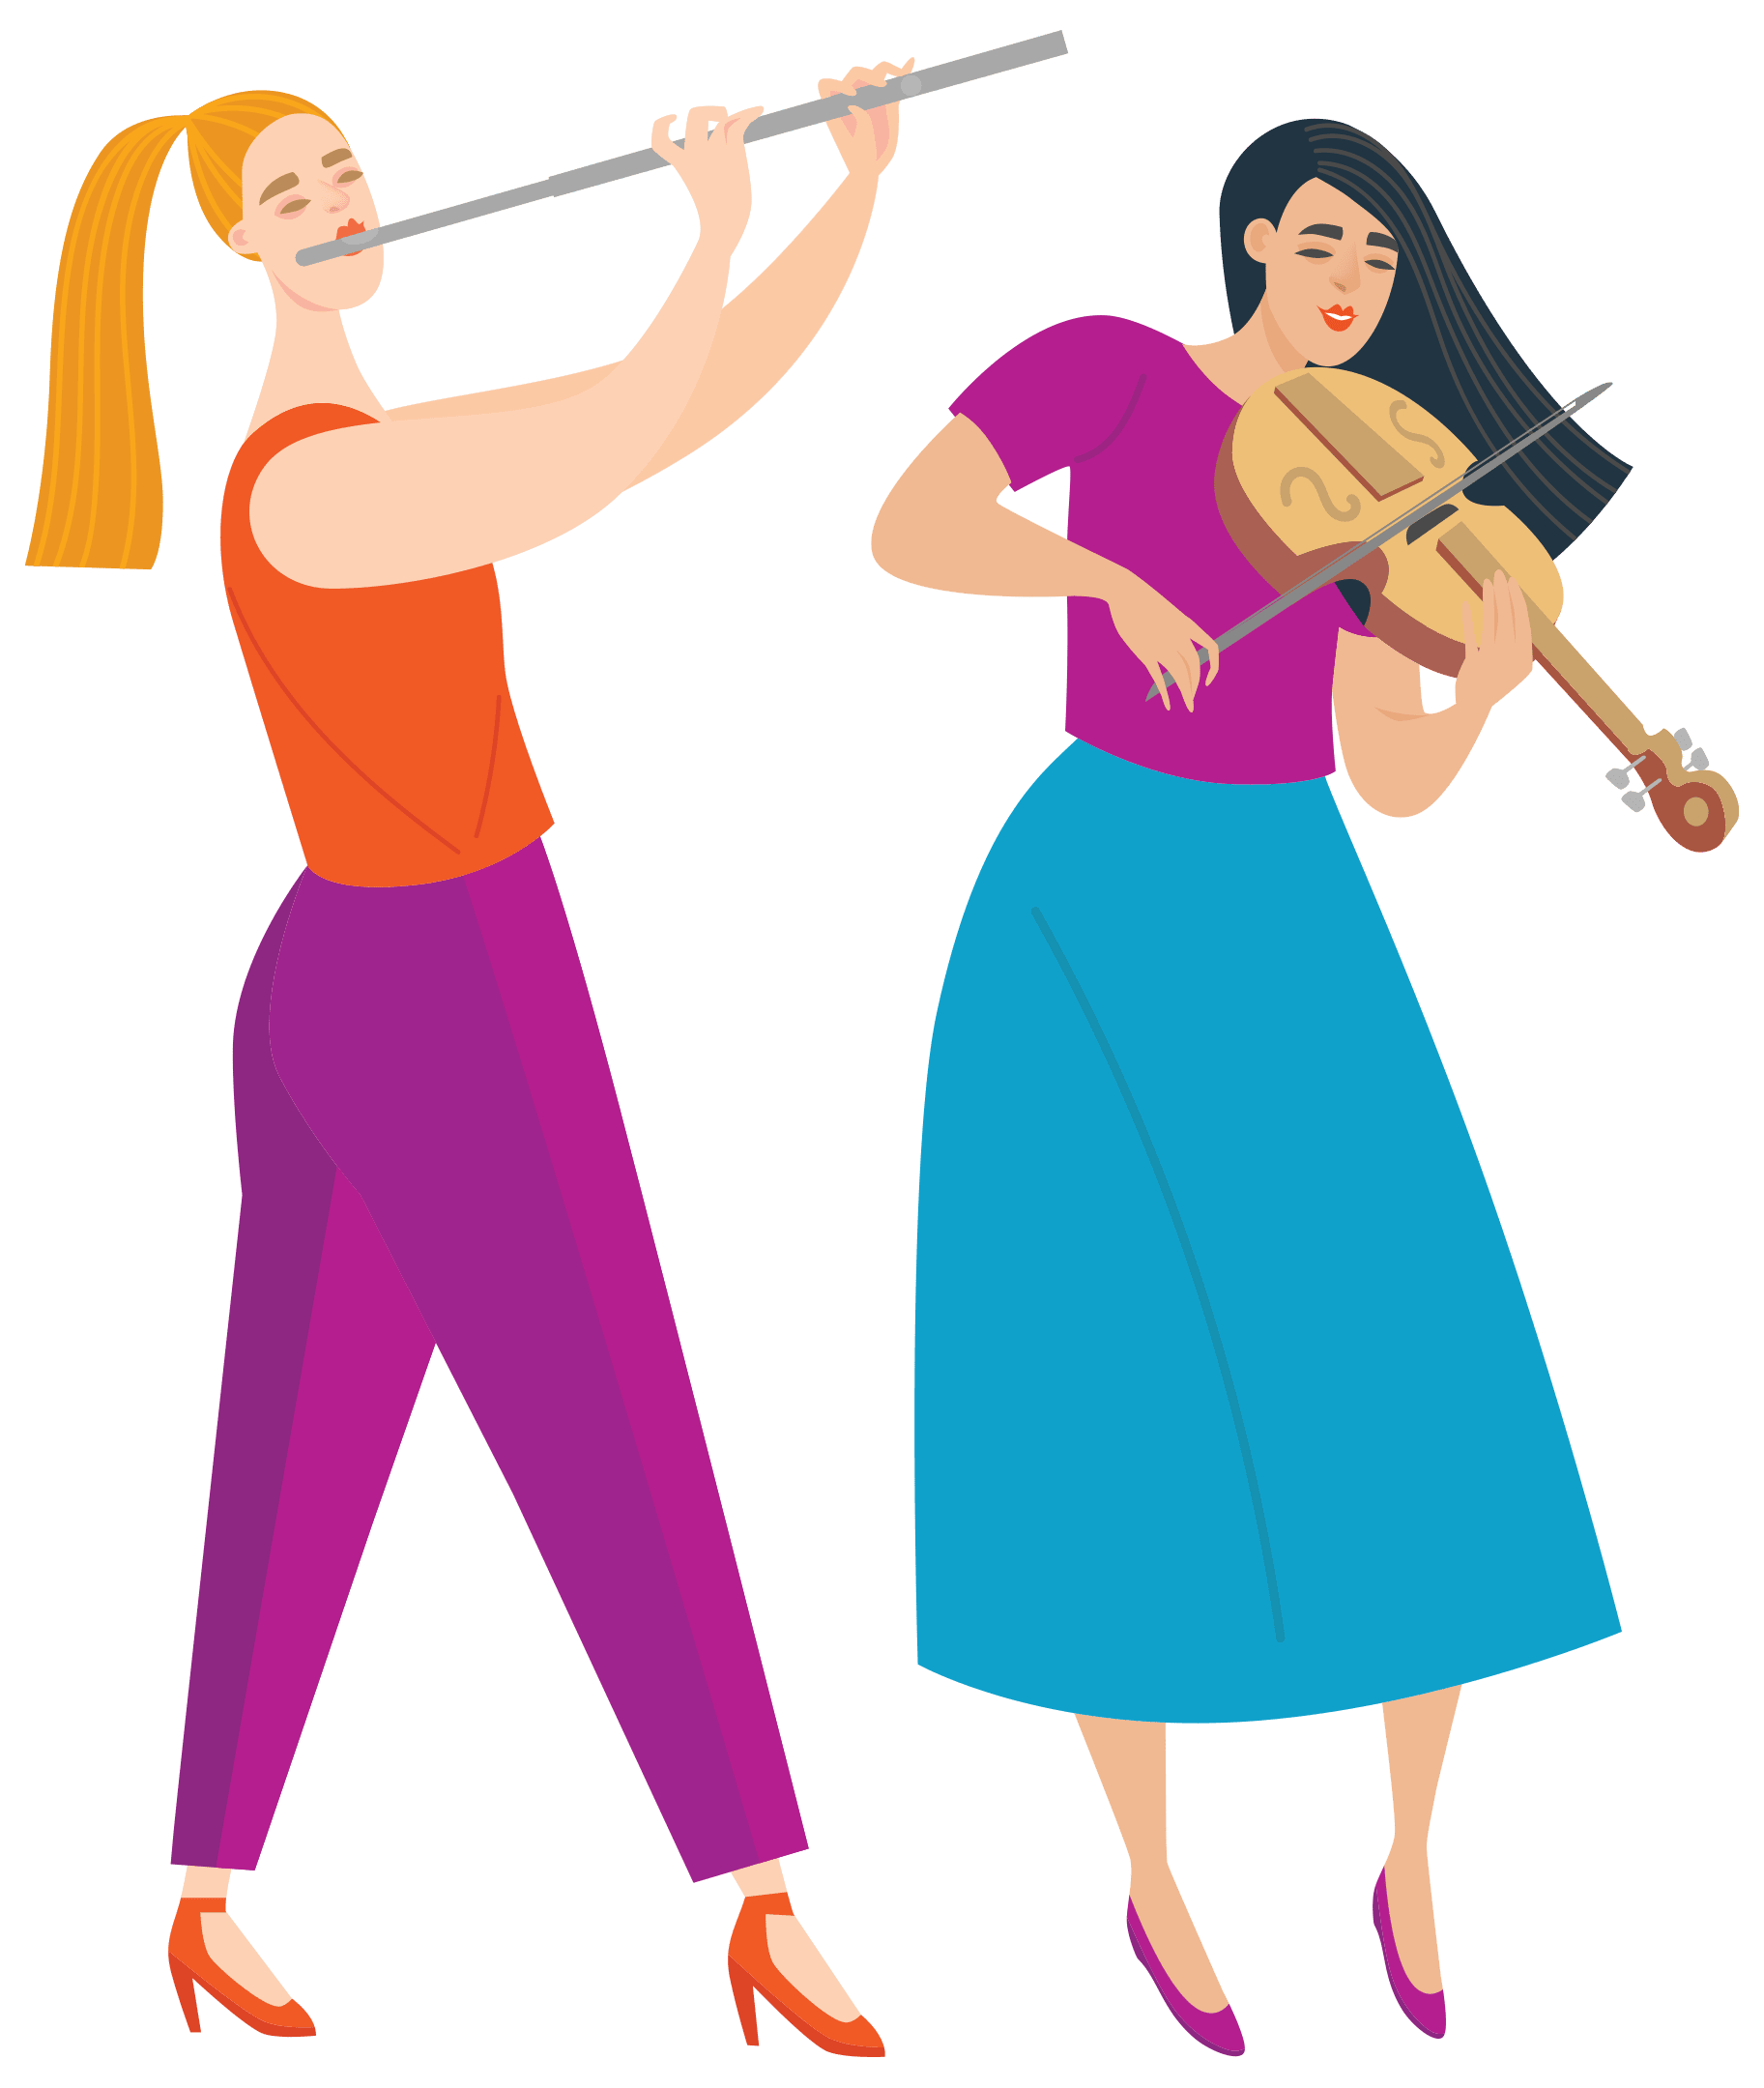 Two women playing the violin and flute